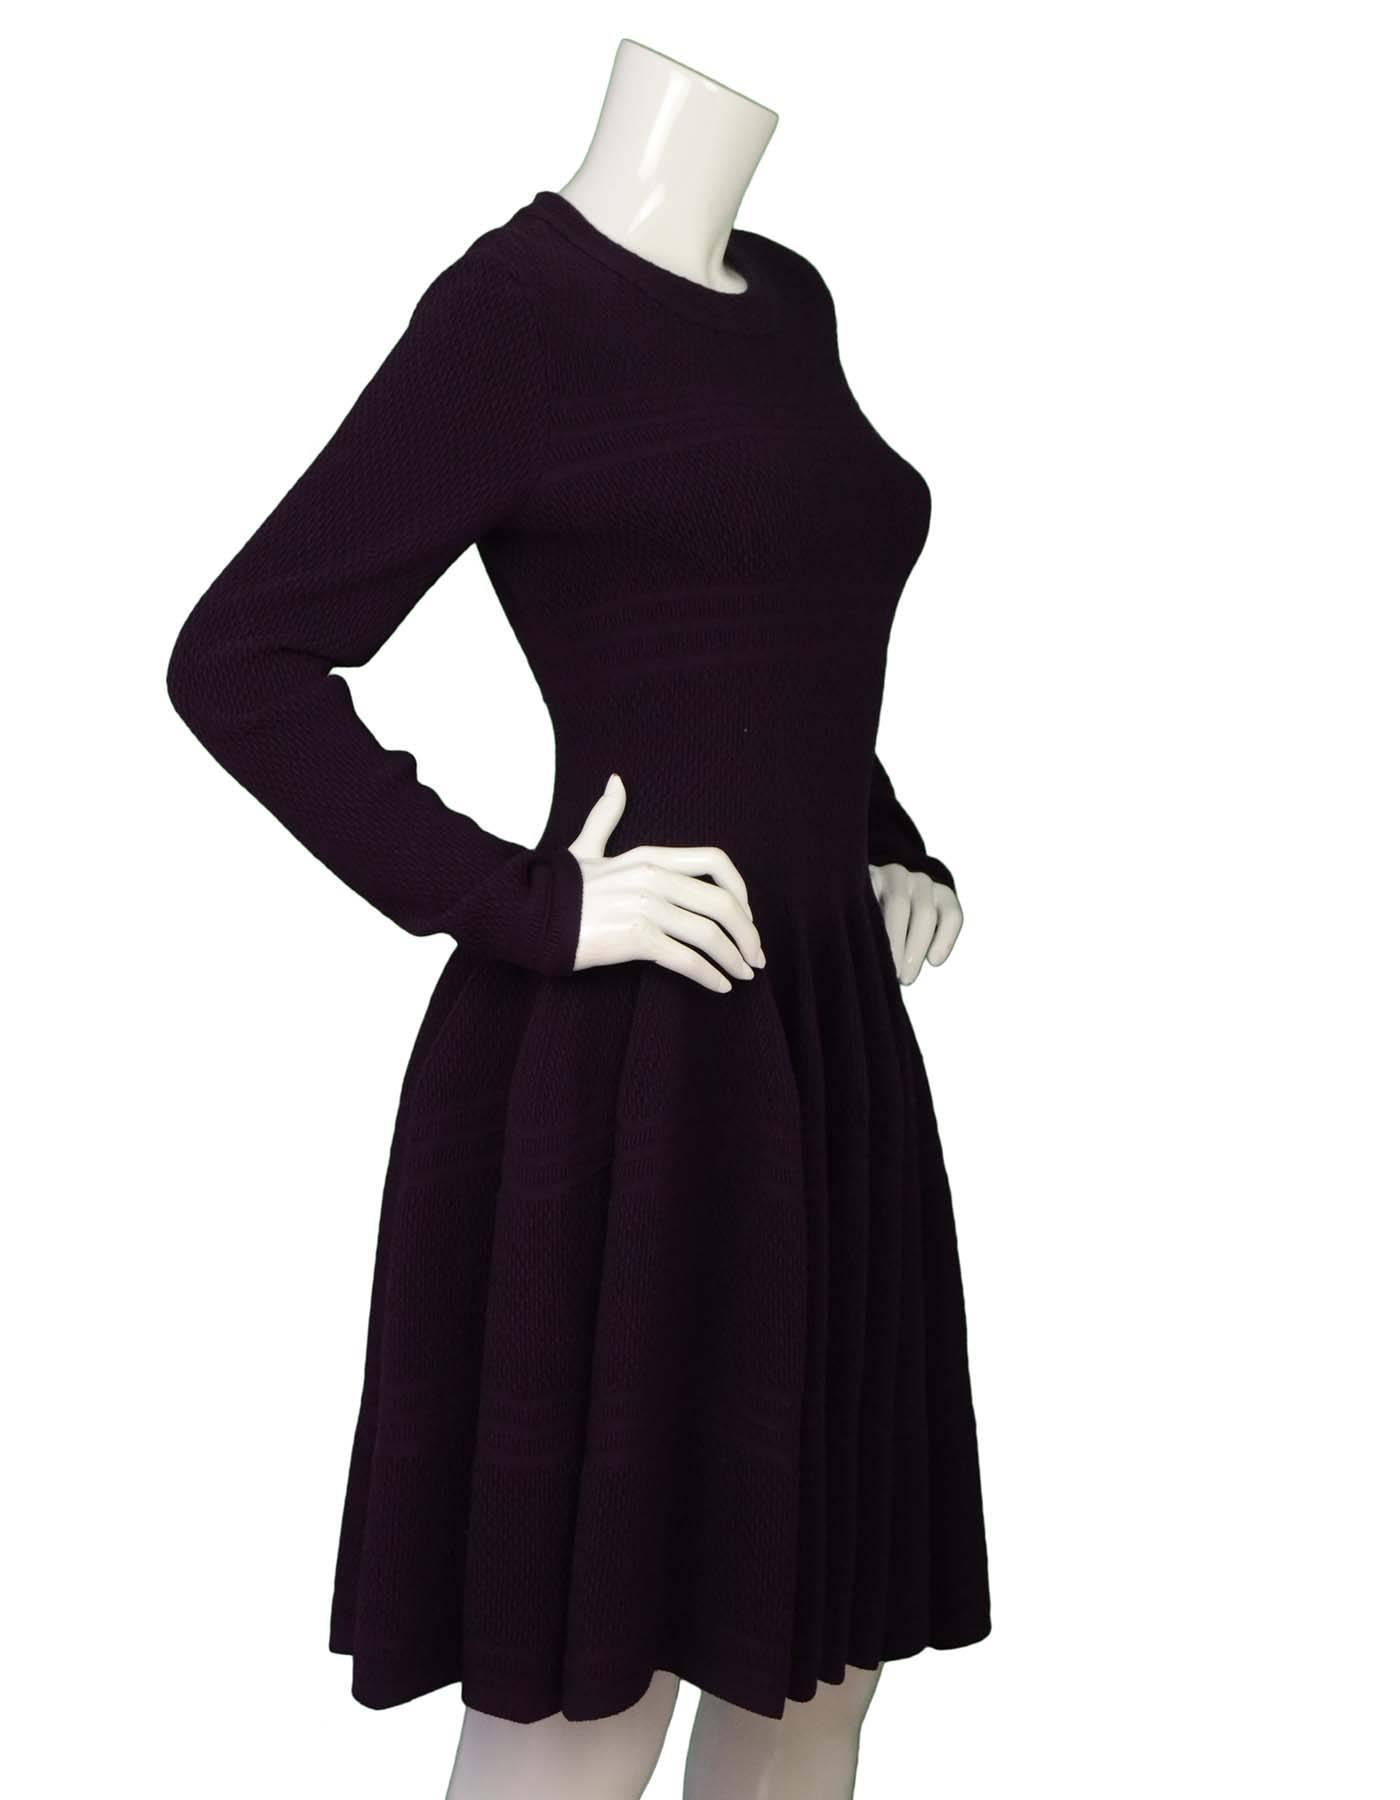 Alaia Plum Fit & Flare Dress Sz 40

Made In: Italy
Color: Plum
Composition: 55% Wool, 20% Viscose, 16% Polyester, 7% Nylon, 2% Elastane
Lining: None
Closure/Opening: Zip closure at back
Overall Condition: Excellent pre-owned